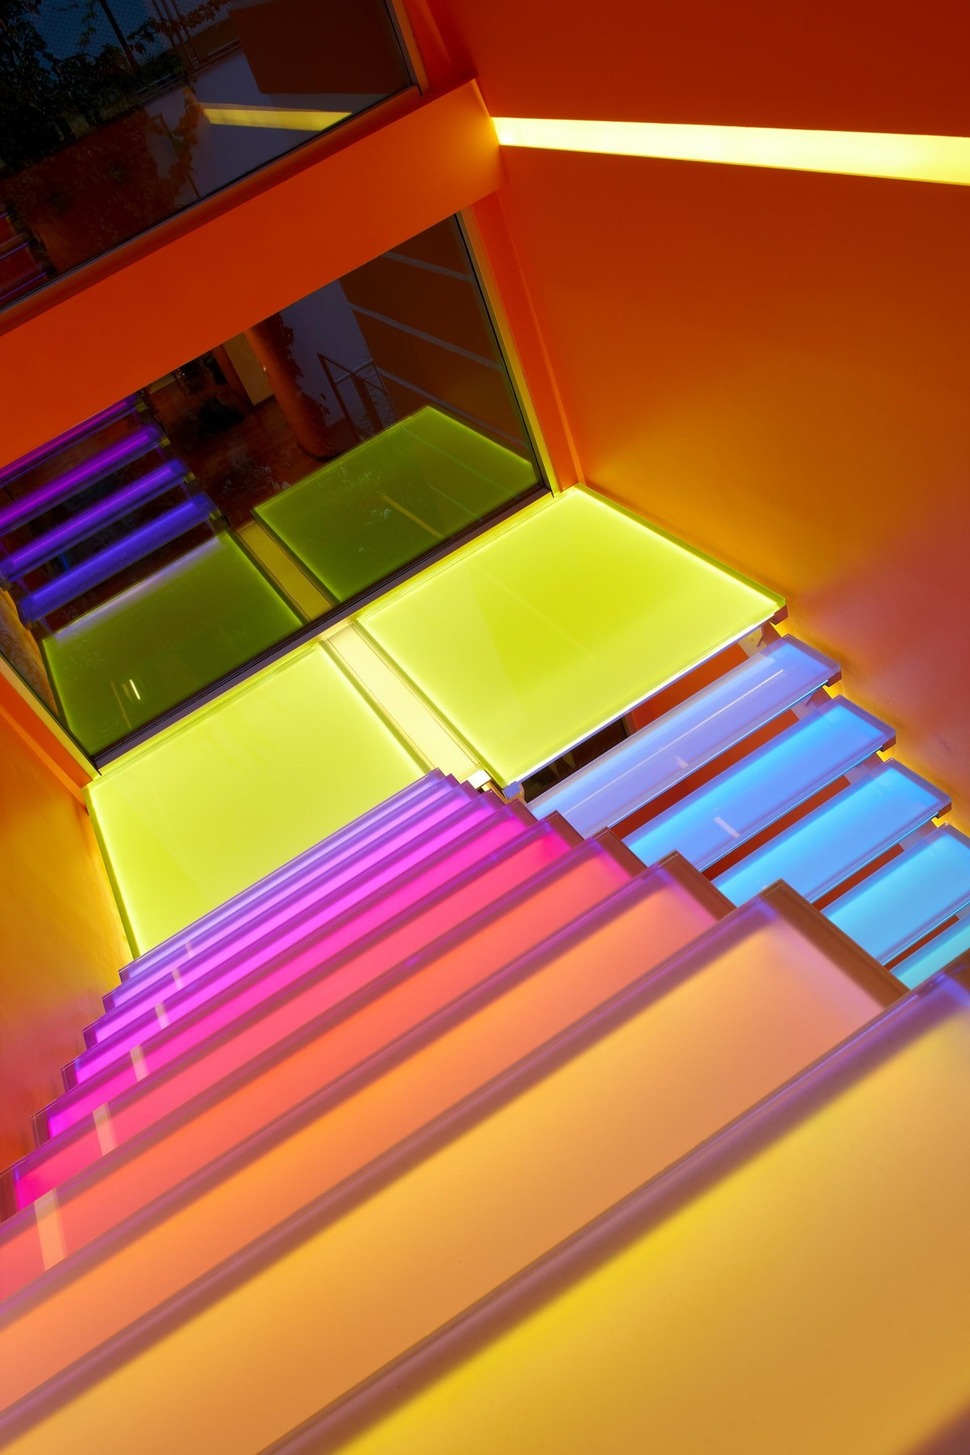 ultramodern-house-with-vibrant-lighting-design-focus-15-stairs-ranbow-down.jpg